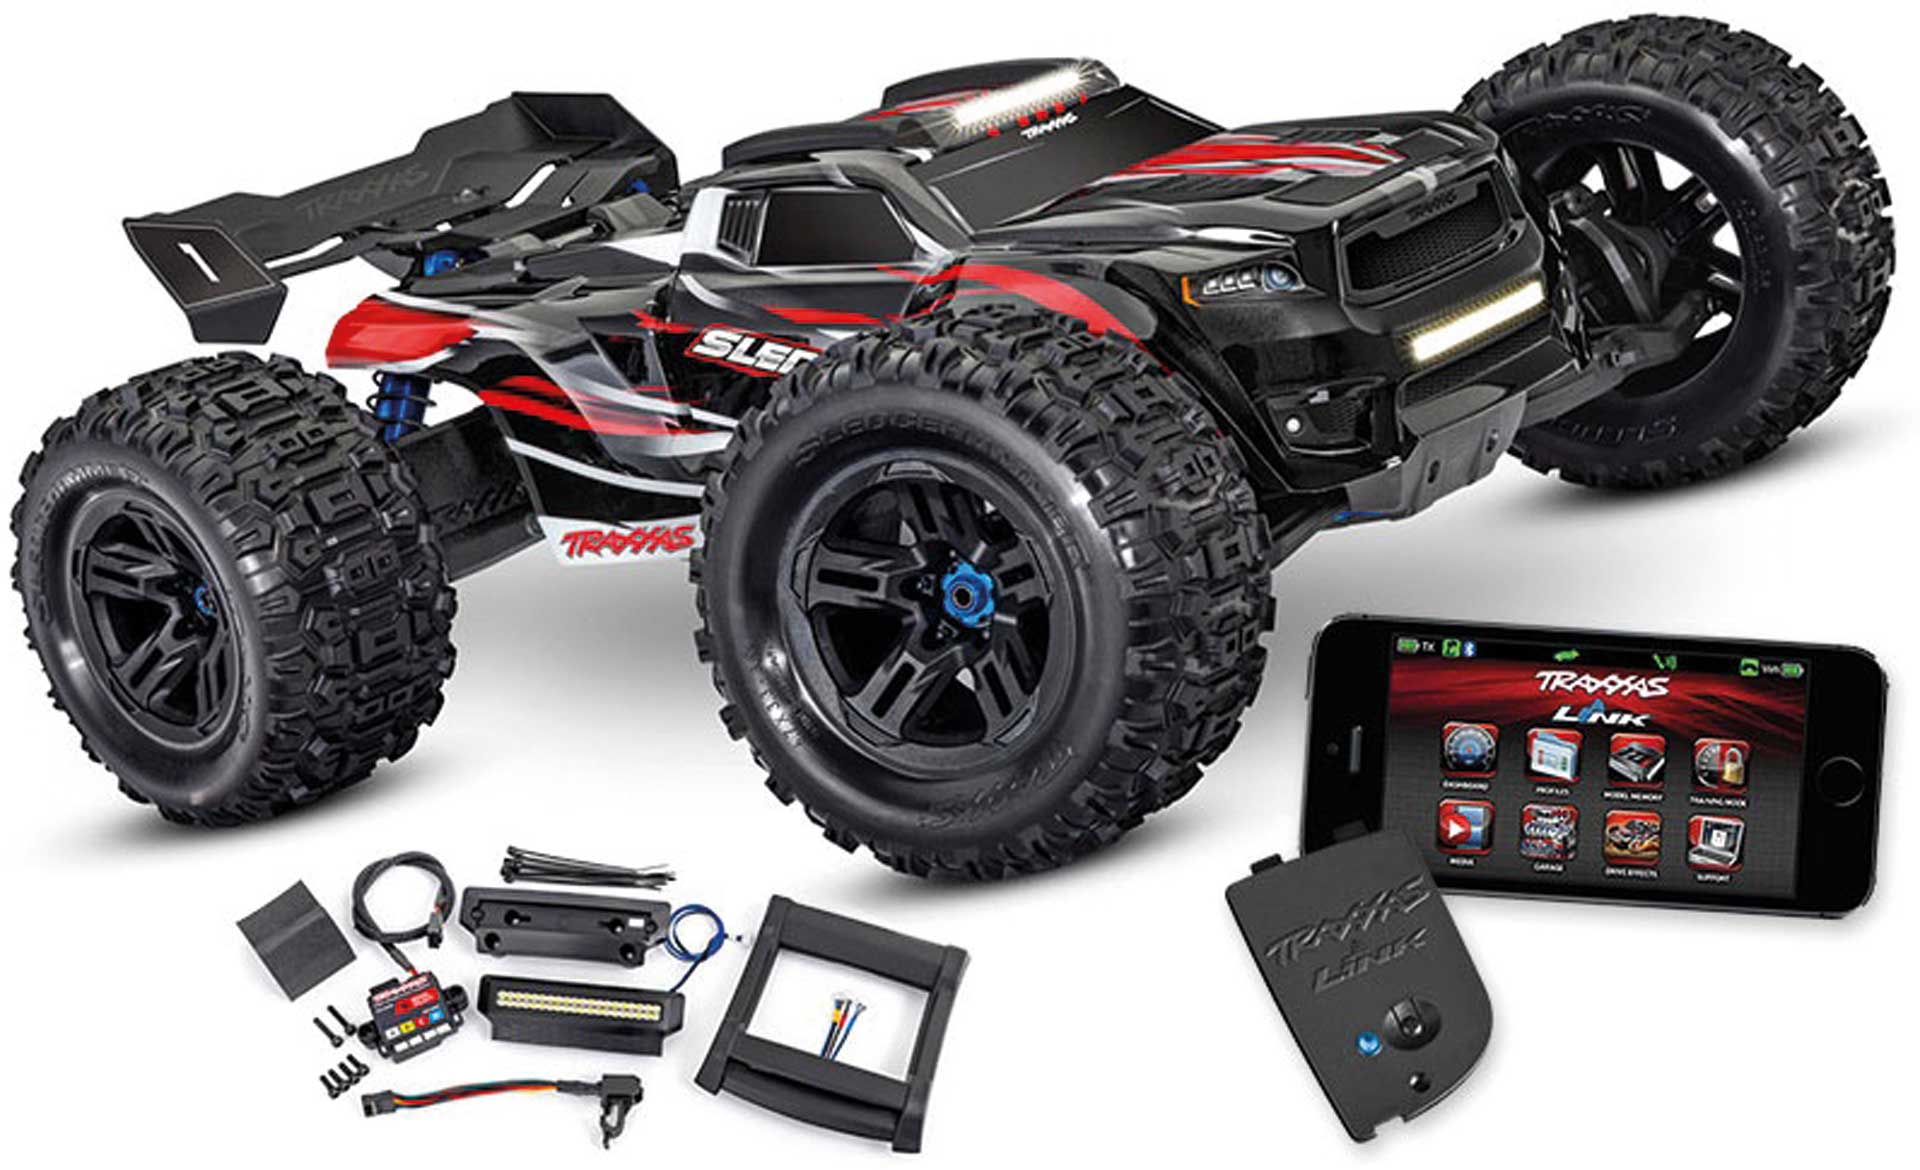 TRAXXAS SLEDGE 4X4 ROUGE 1/8 MONSTER-TRUCK RTR BRUSHLESS + LUMIÈRE & WIRELESS LINK SANS ACCU/CHARGEUR